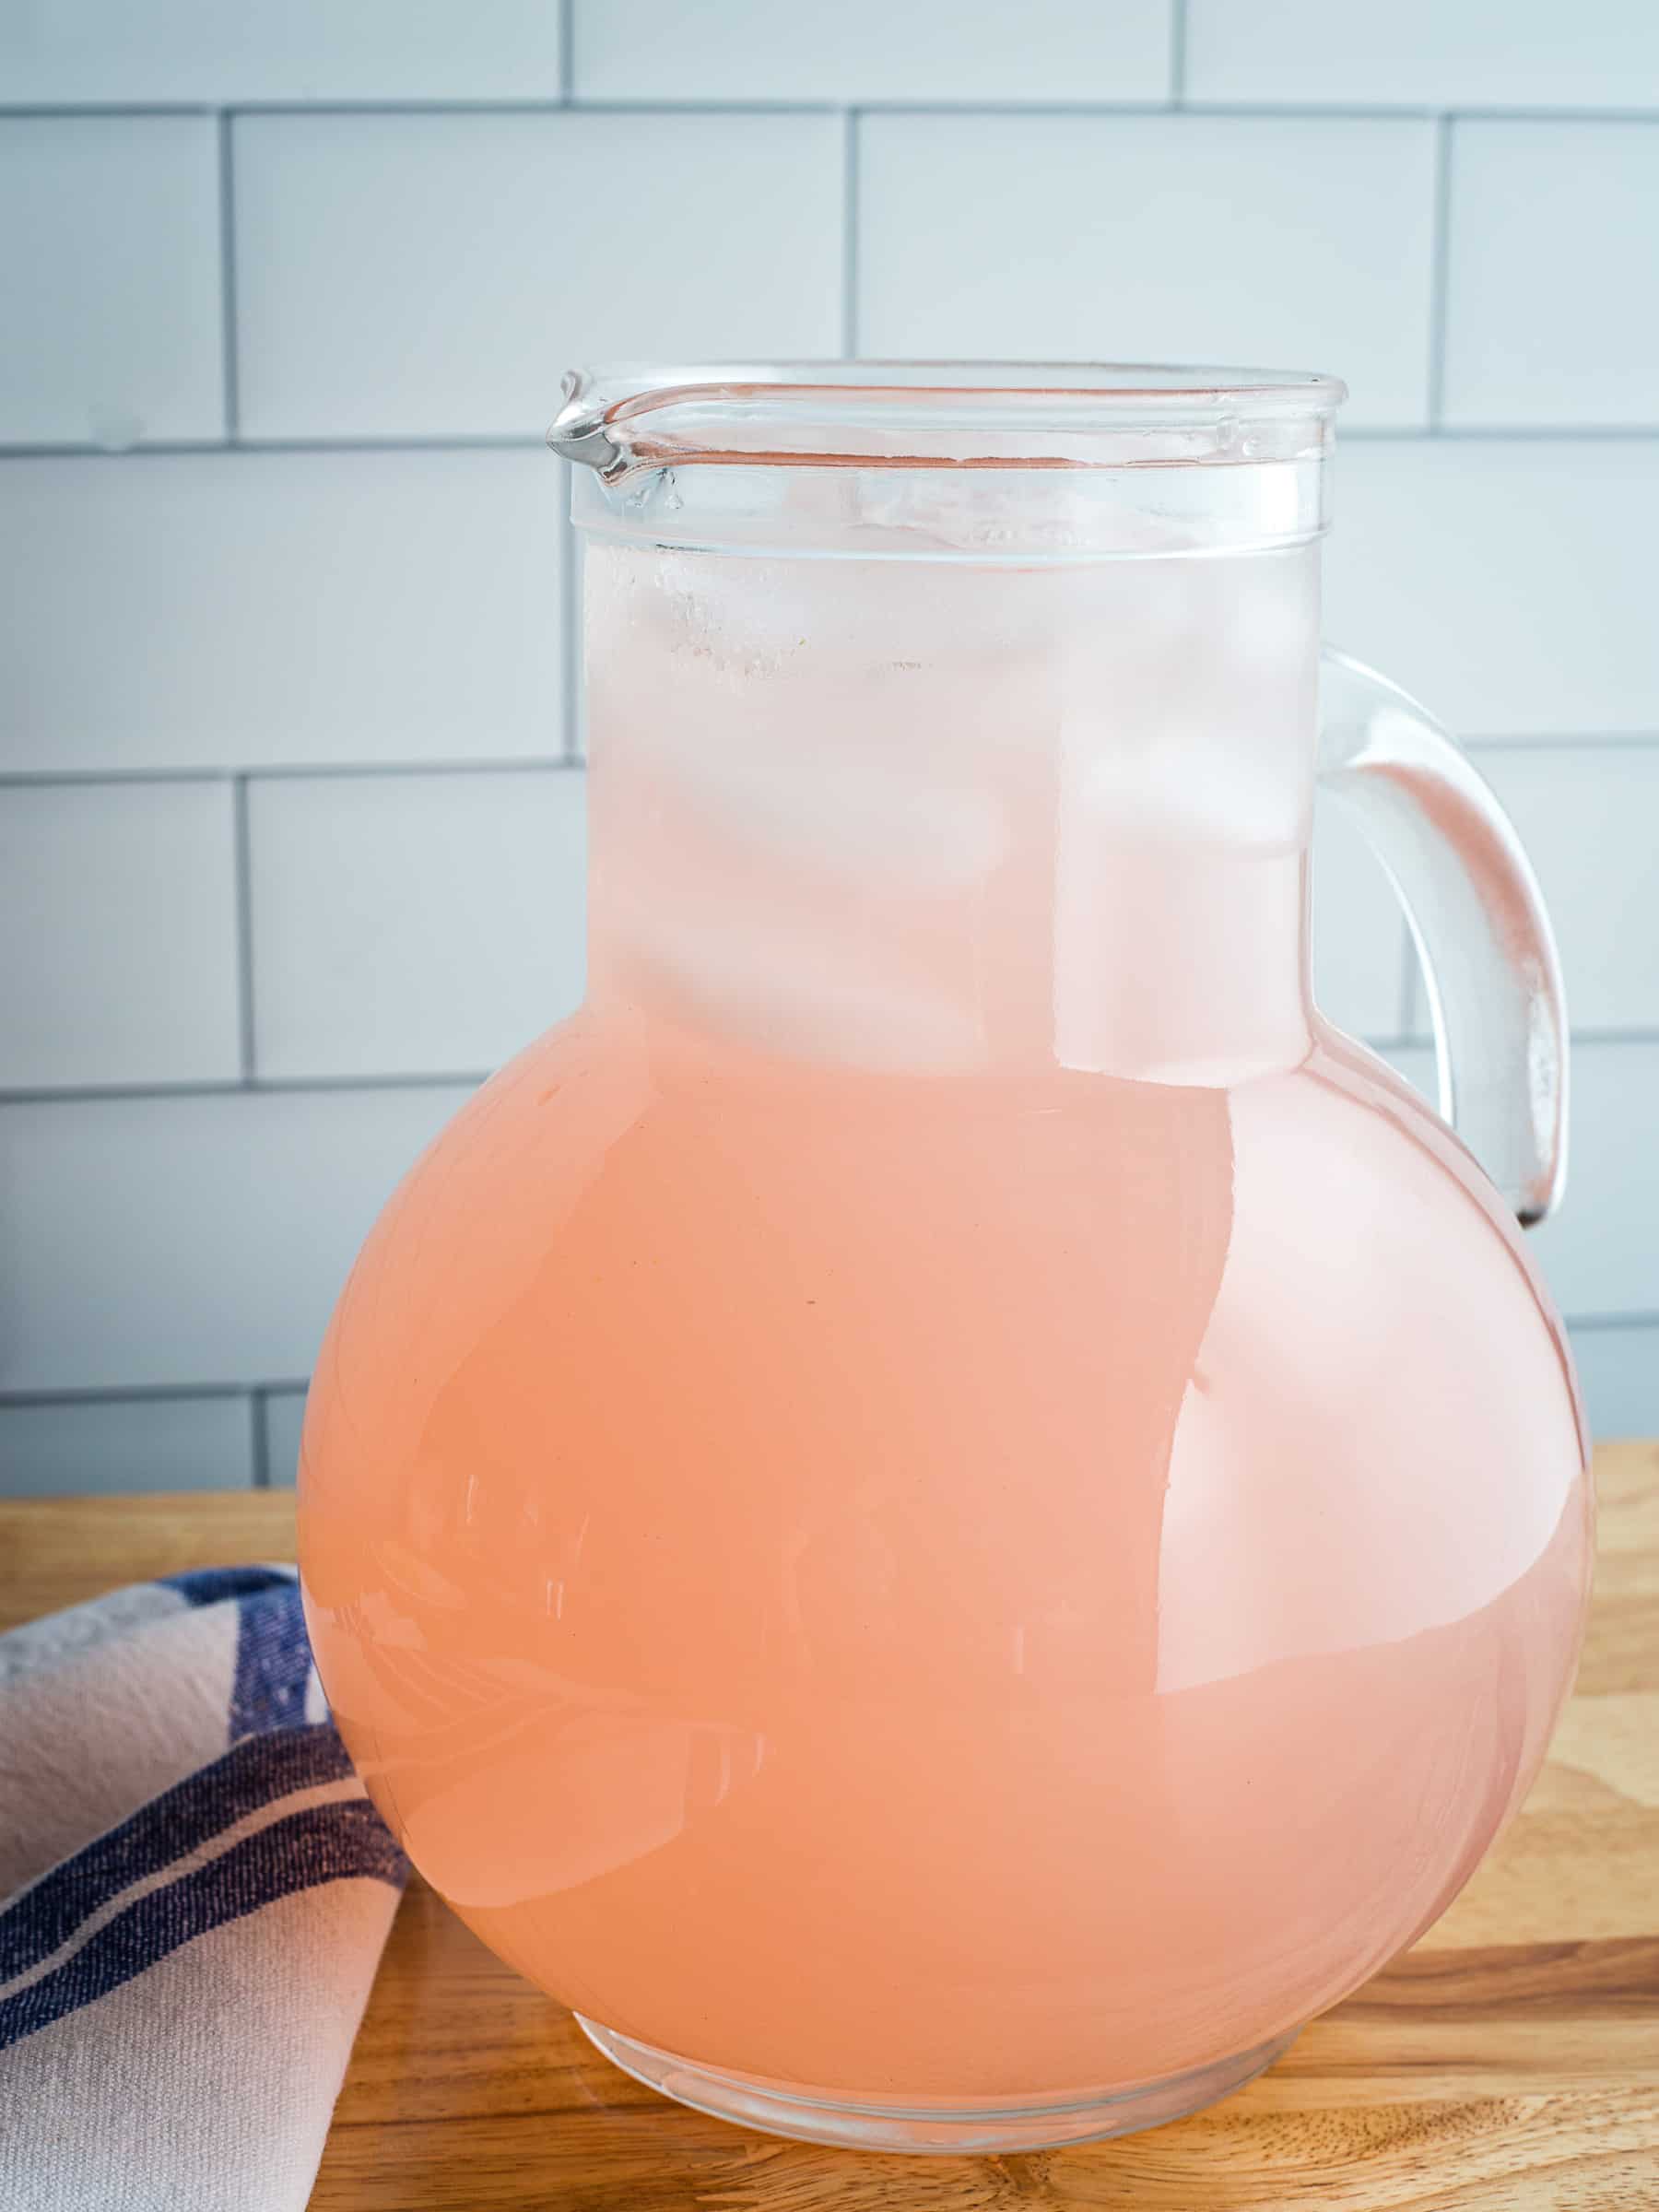 Pink lemonade in a glass pitcher.